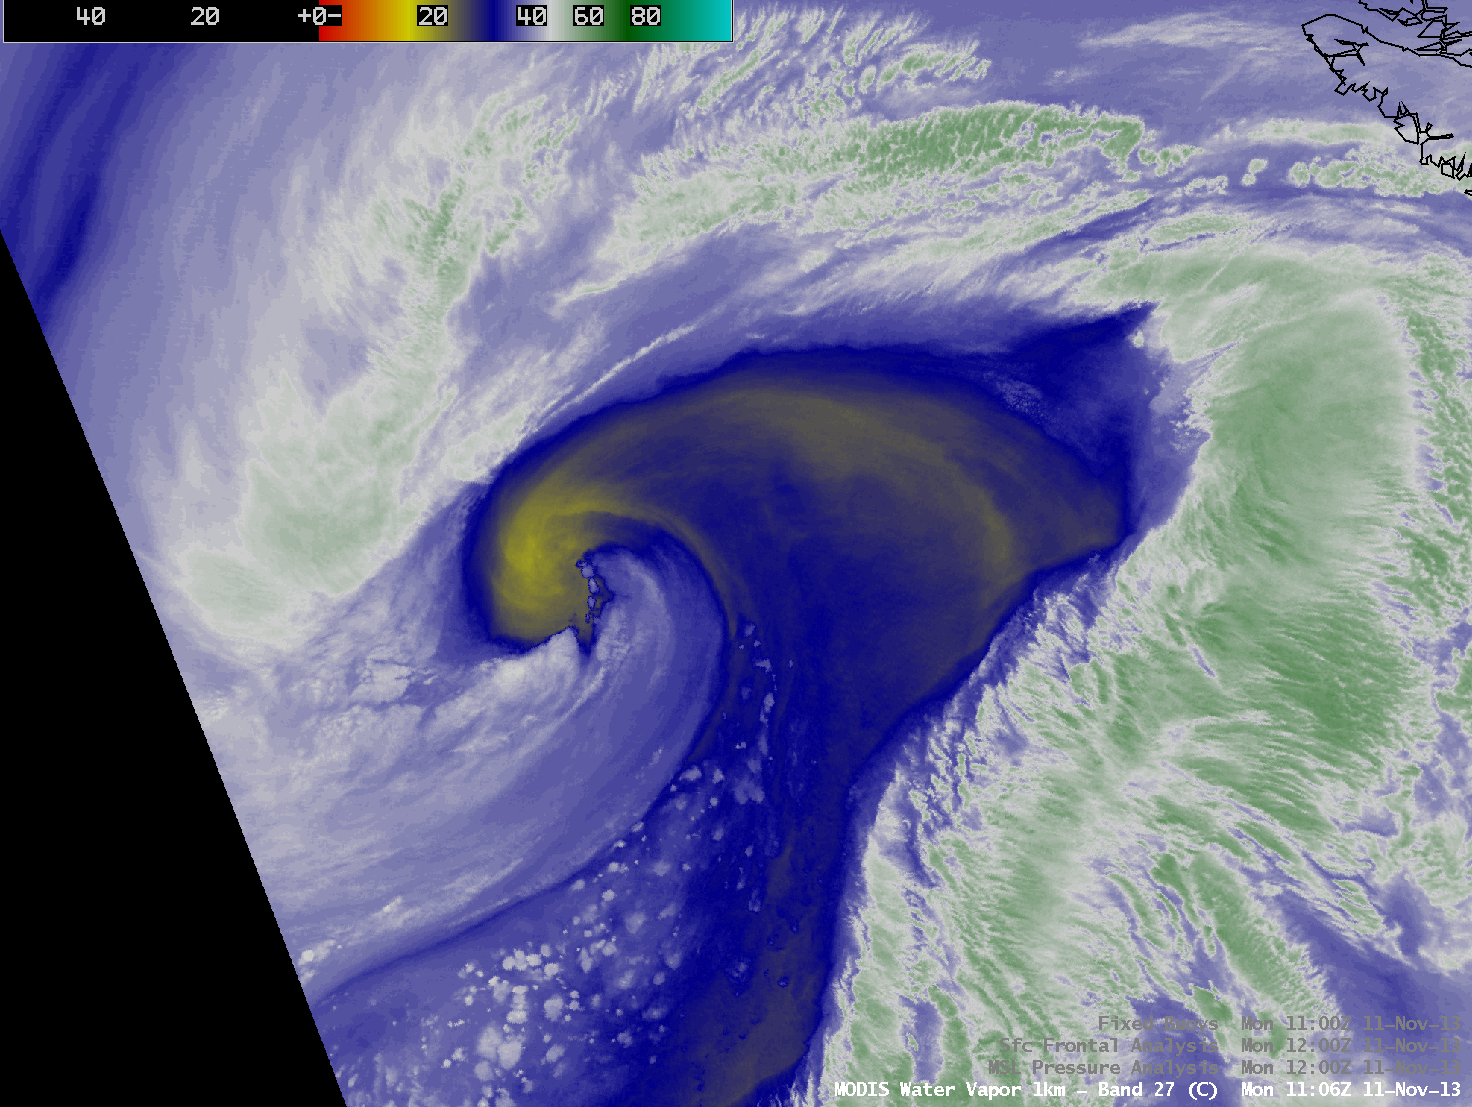 MODIS 6.5 Âµm water vapor image, with surface analysis and buoy reports